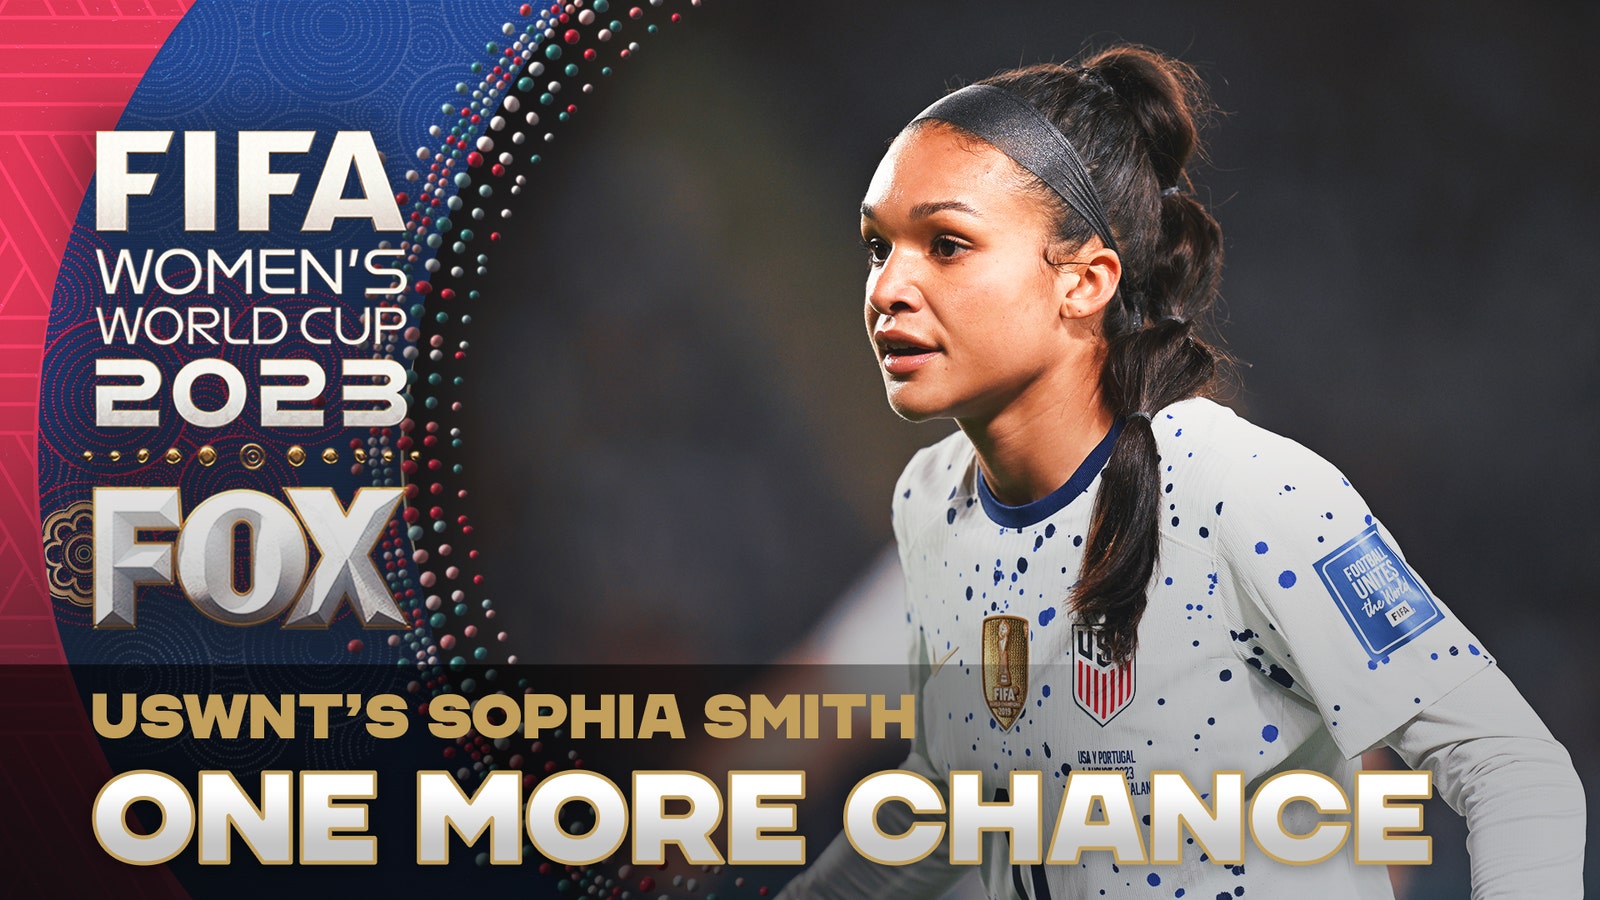 "There's this misconception that inside, we're not doing well" — USWNT's Sophia Smith on upcoming match against Sweden